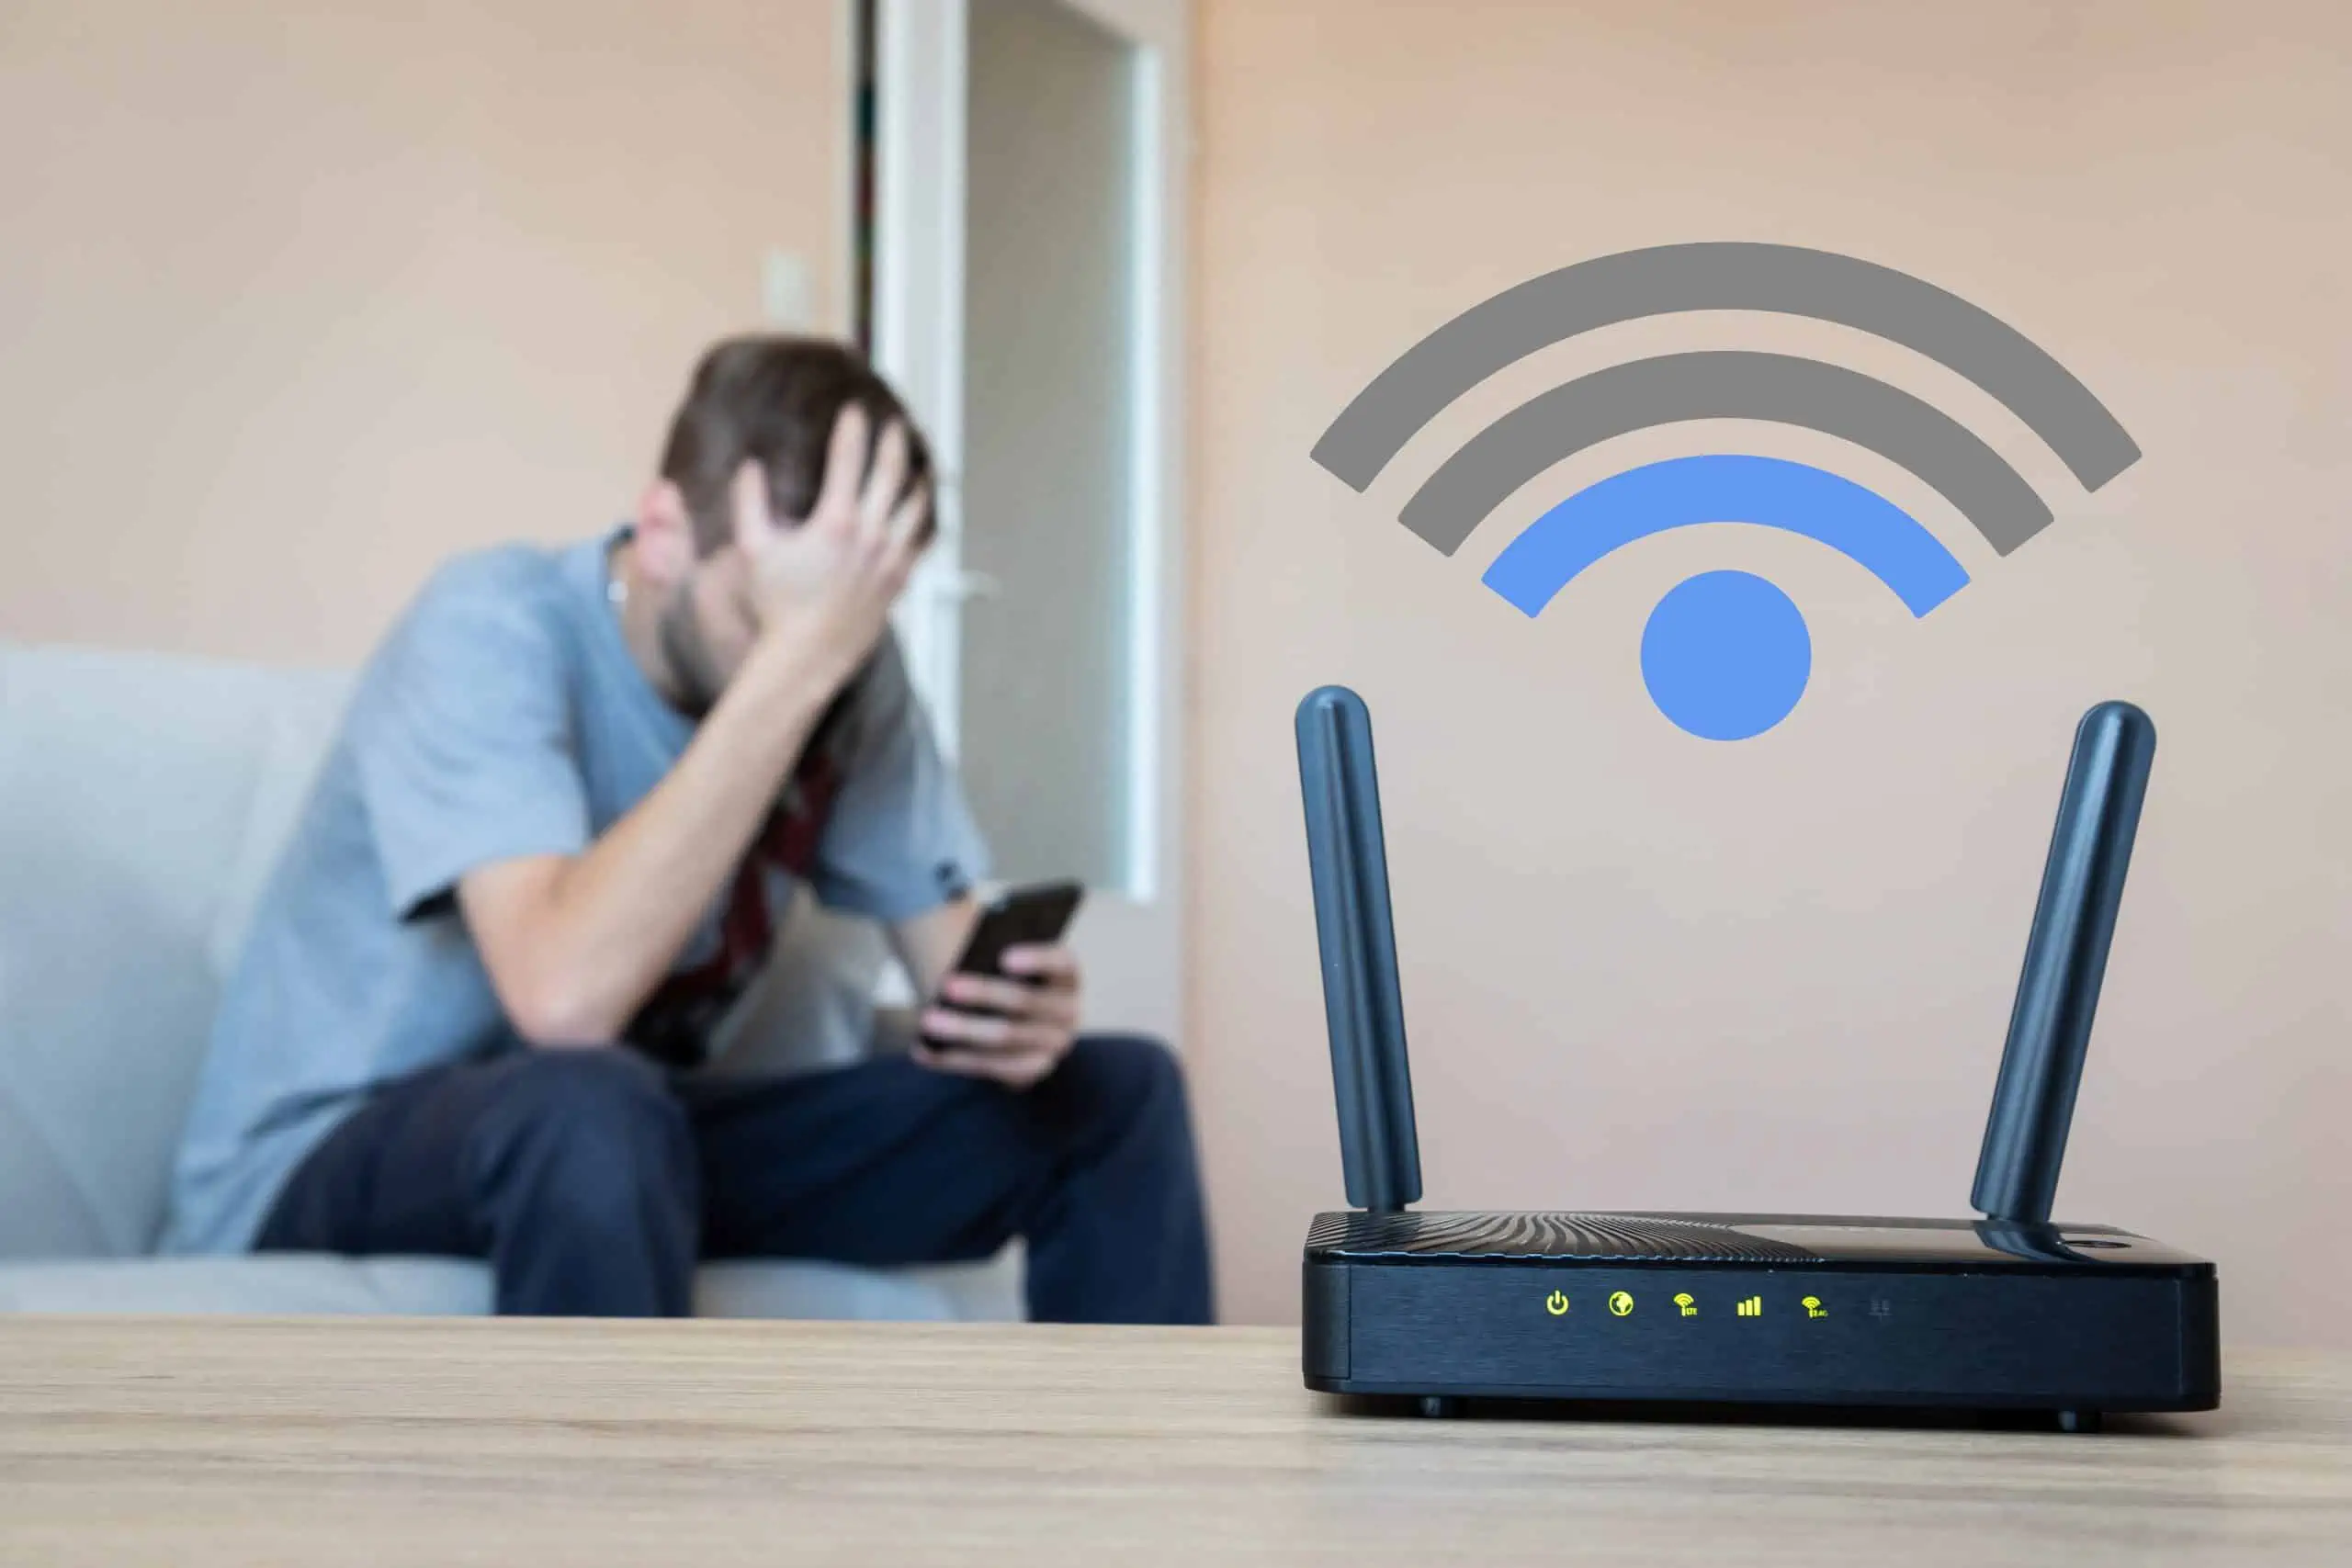 WiFi Router With Bad WiFi Signal Problems And Slow Internet